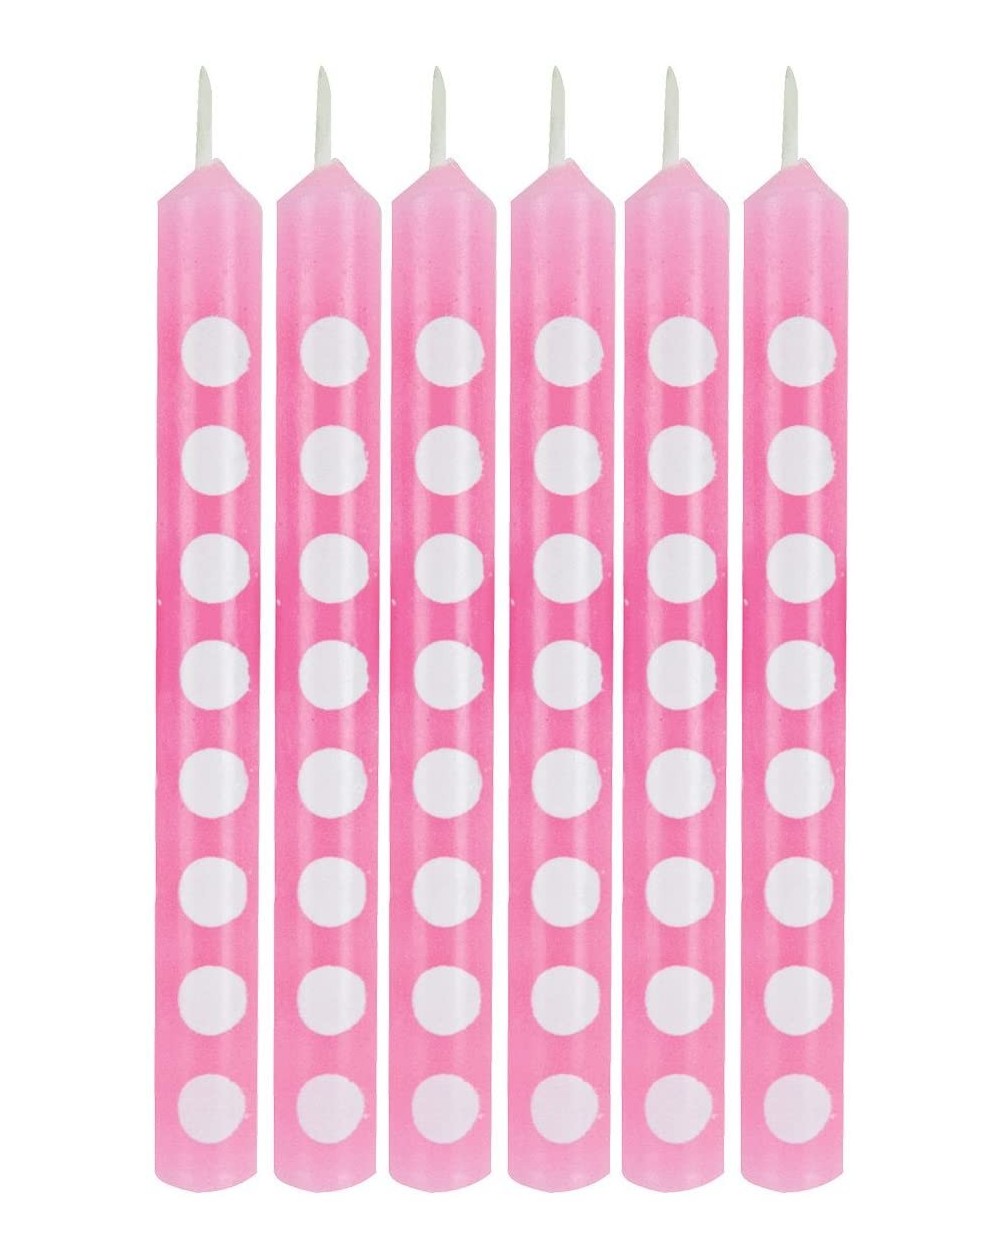 Cake Decorating Supplies Cake Candle- 2.25"- Candy Pink - Candy Pink - CT11SOIXYUZ $9.77